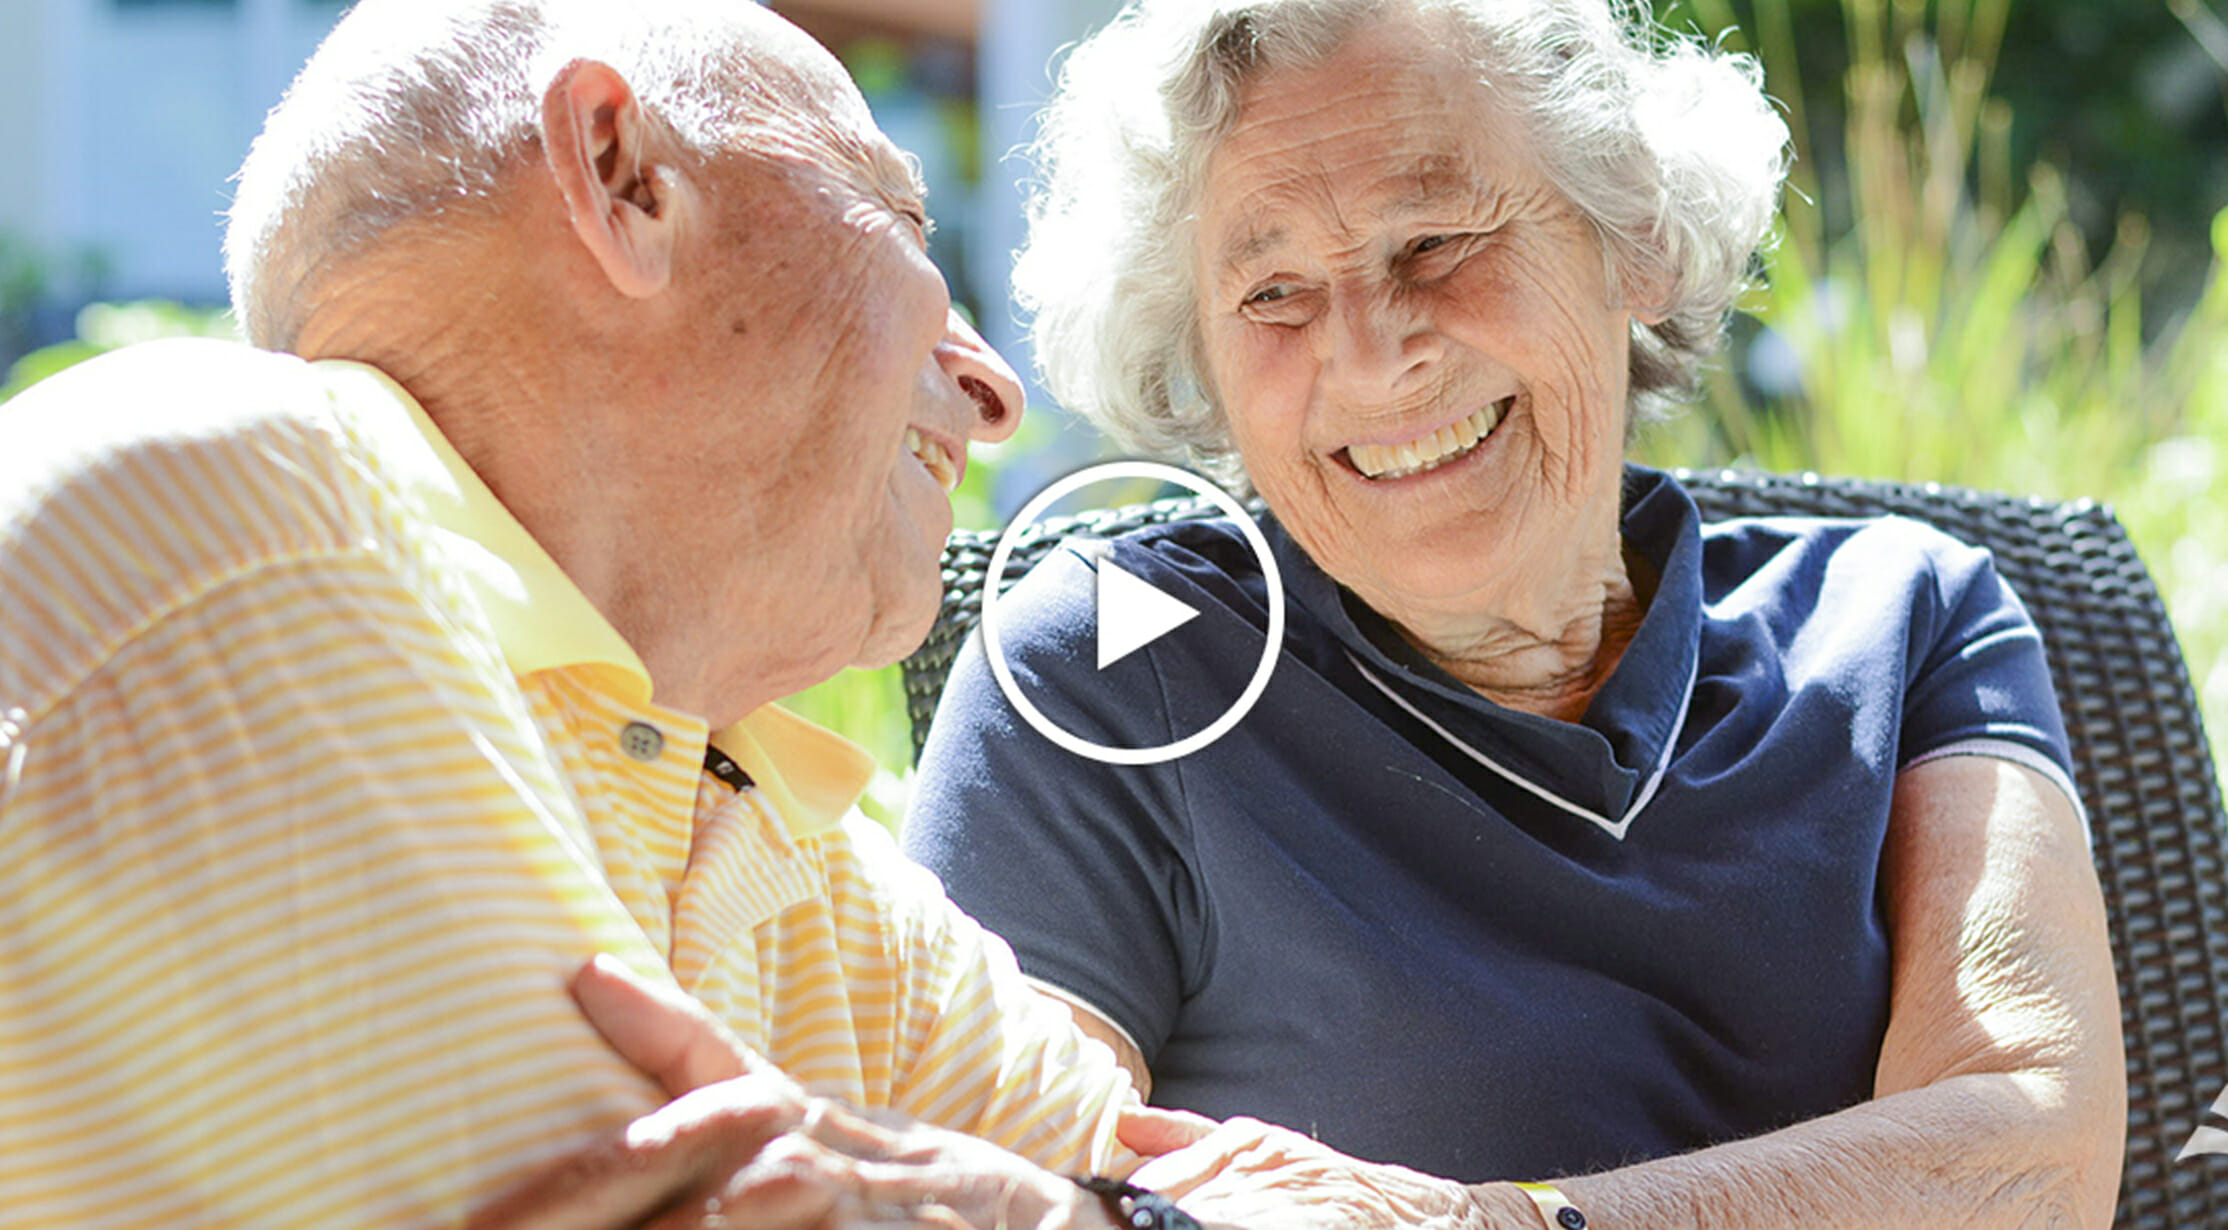 Independent living resident with Memory-Impaired spouse enjoying time together in Serenity Gardens, continuum of care